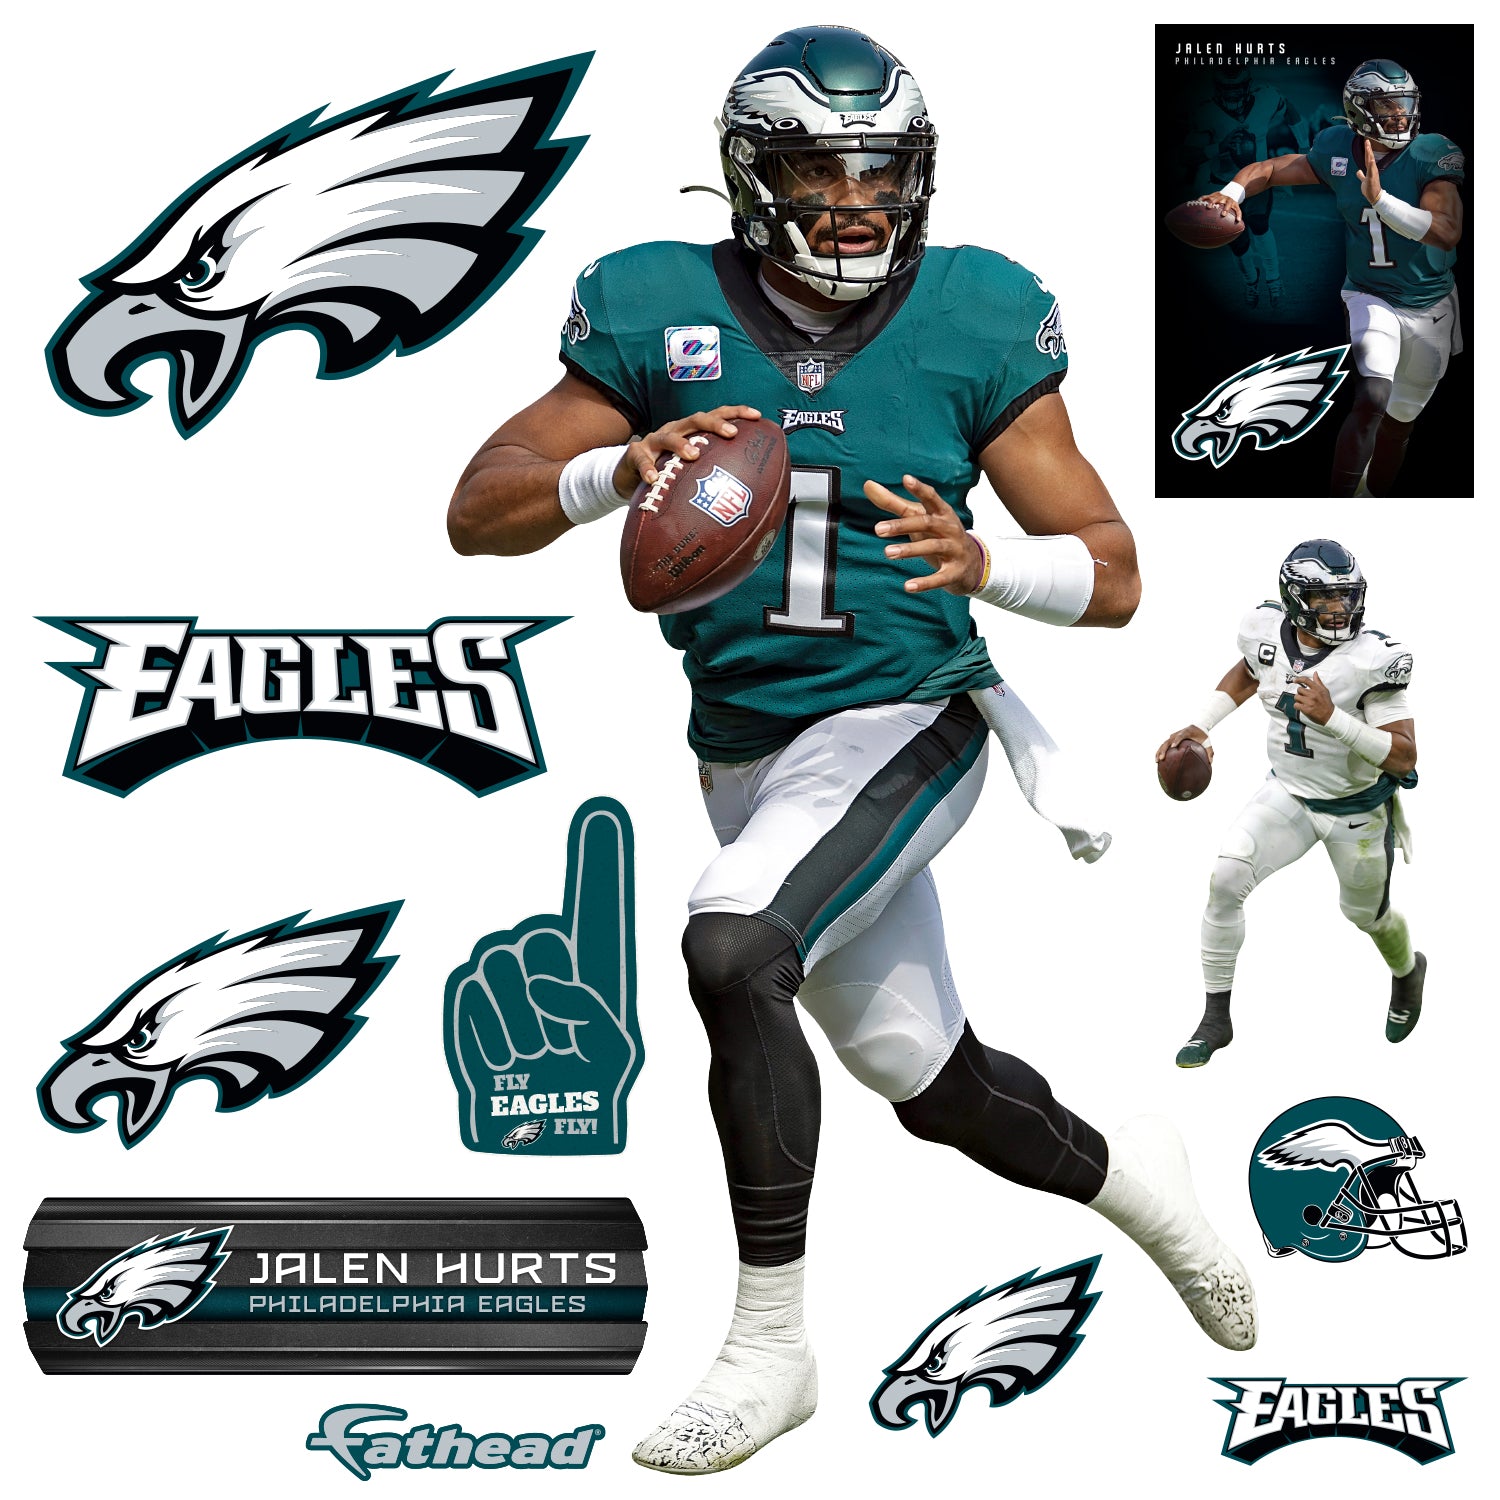 Philadelphia Eagles: Jalen Hurts 2021 No.1 - NFL Removable Adhesive Wall Decal Giant Athlete +2 Wall Decals 28W x 51H